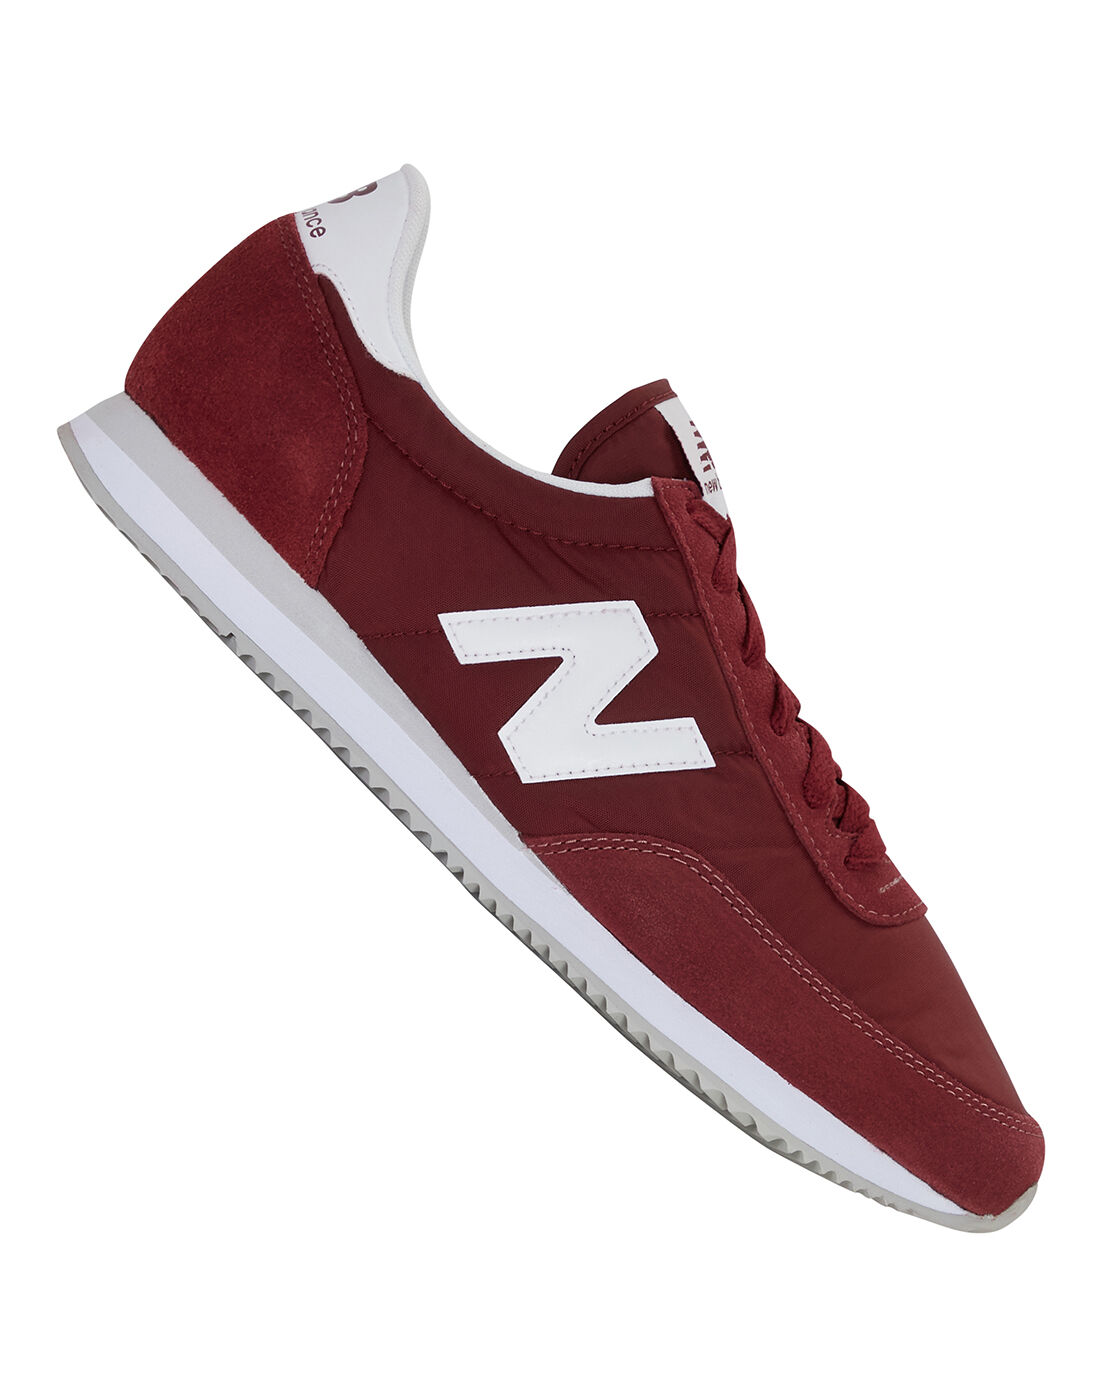 new balance suede soccer trainers